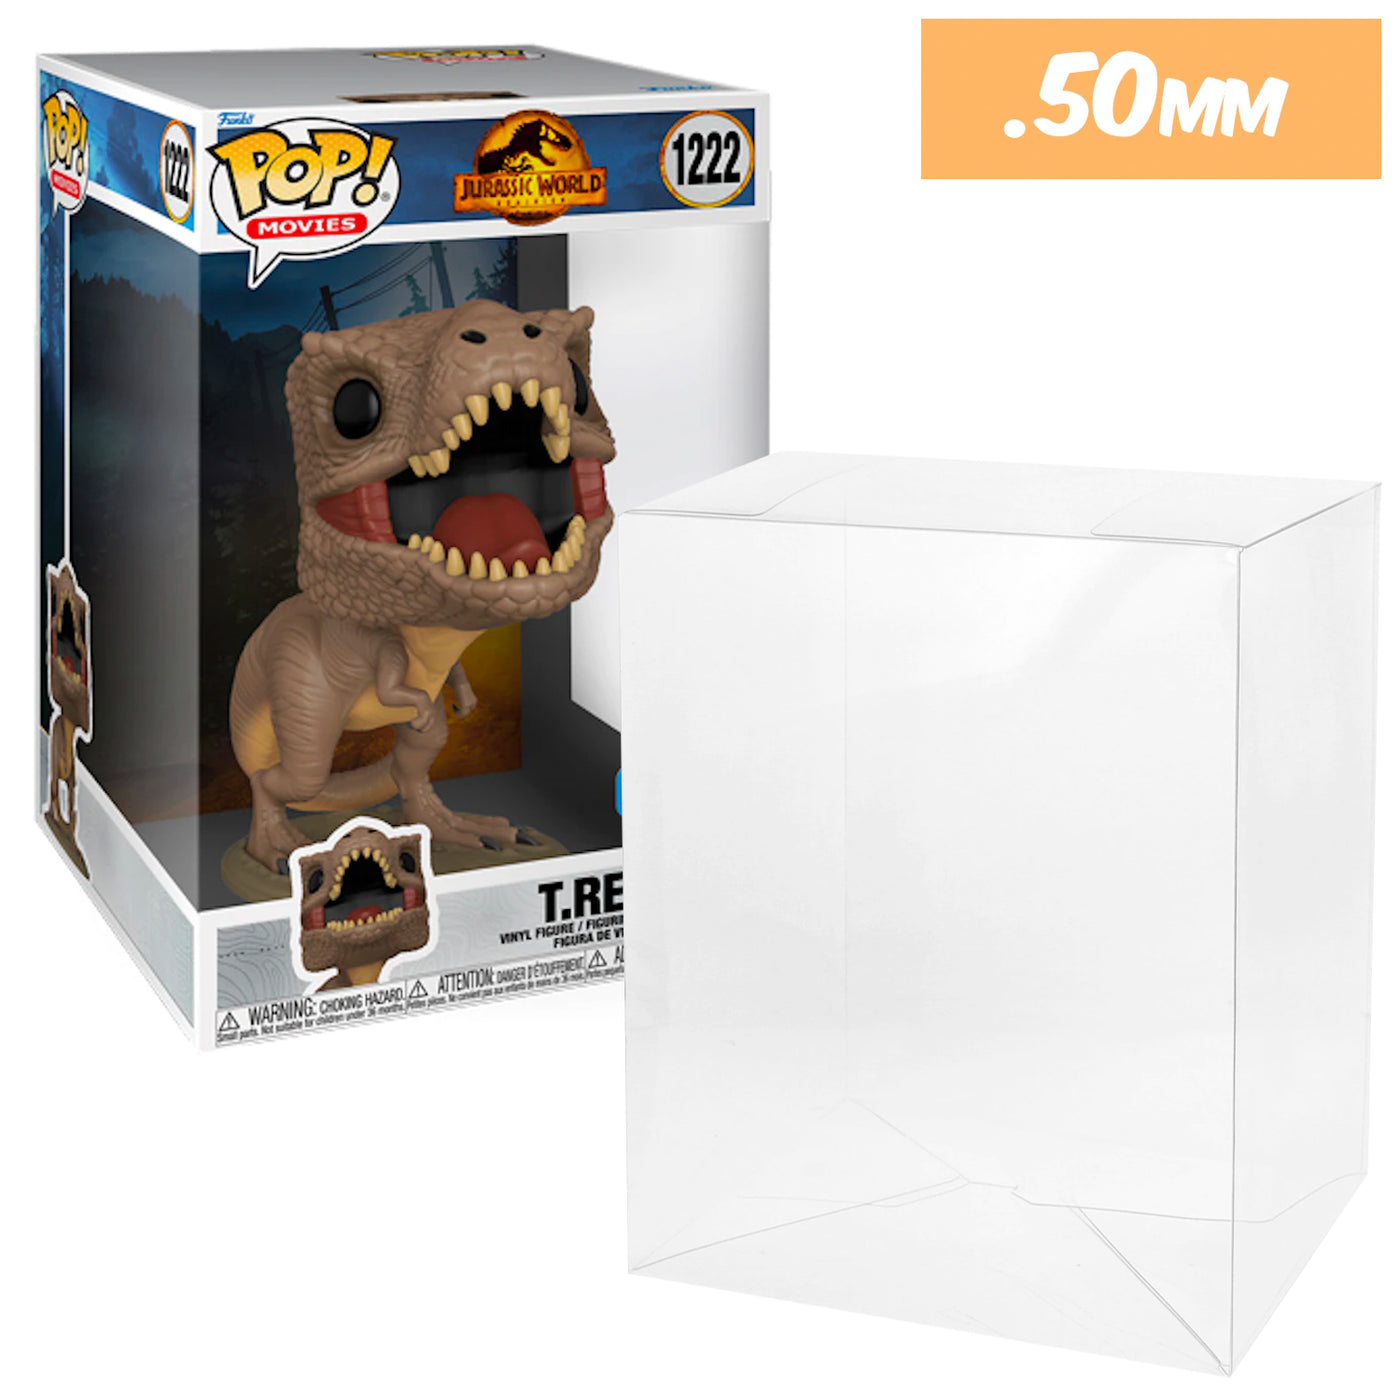 10 inch new size jurassic world t.rex trex best funko pop protectors thick strong uv scratch flat top stack vinyl display geek plastic shield vaulted eco armor fits collect protect display case kollector protector